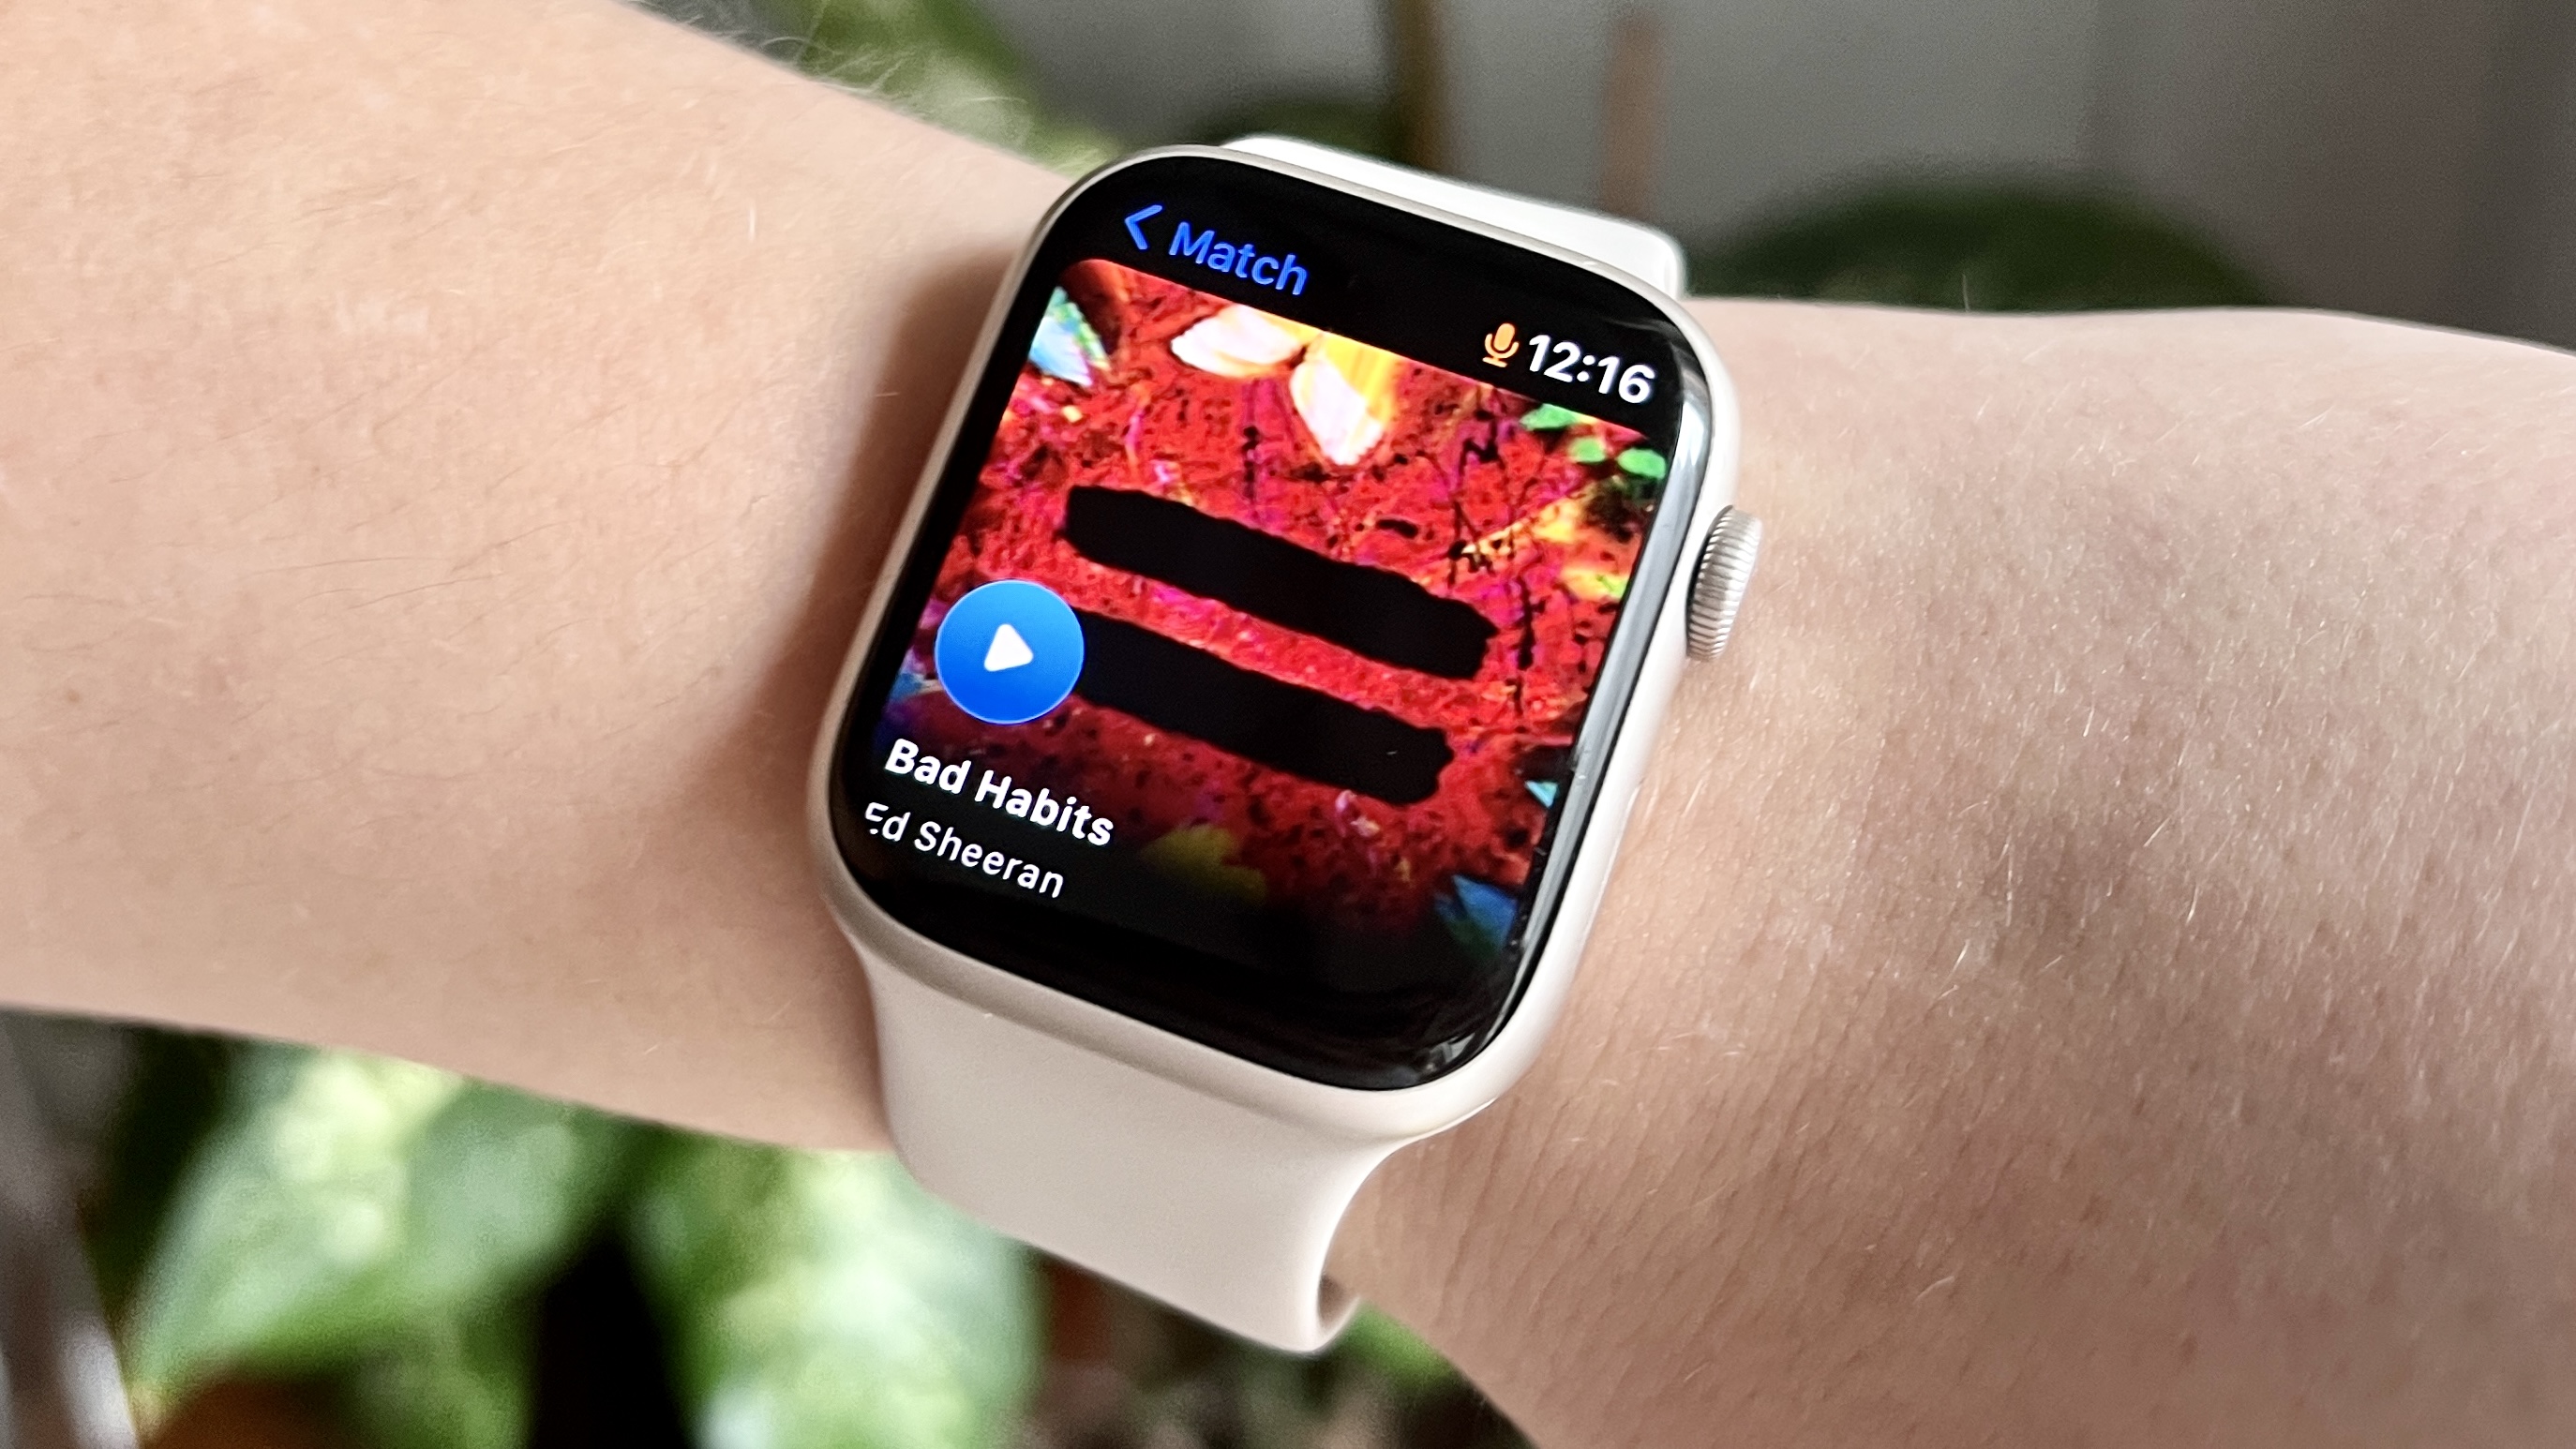 Apple Watch shazam song tag